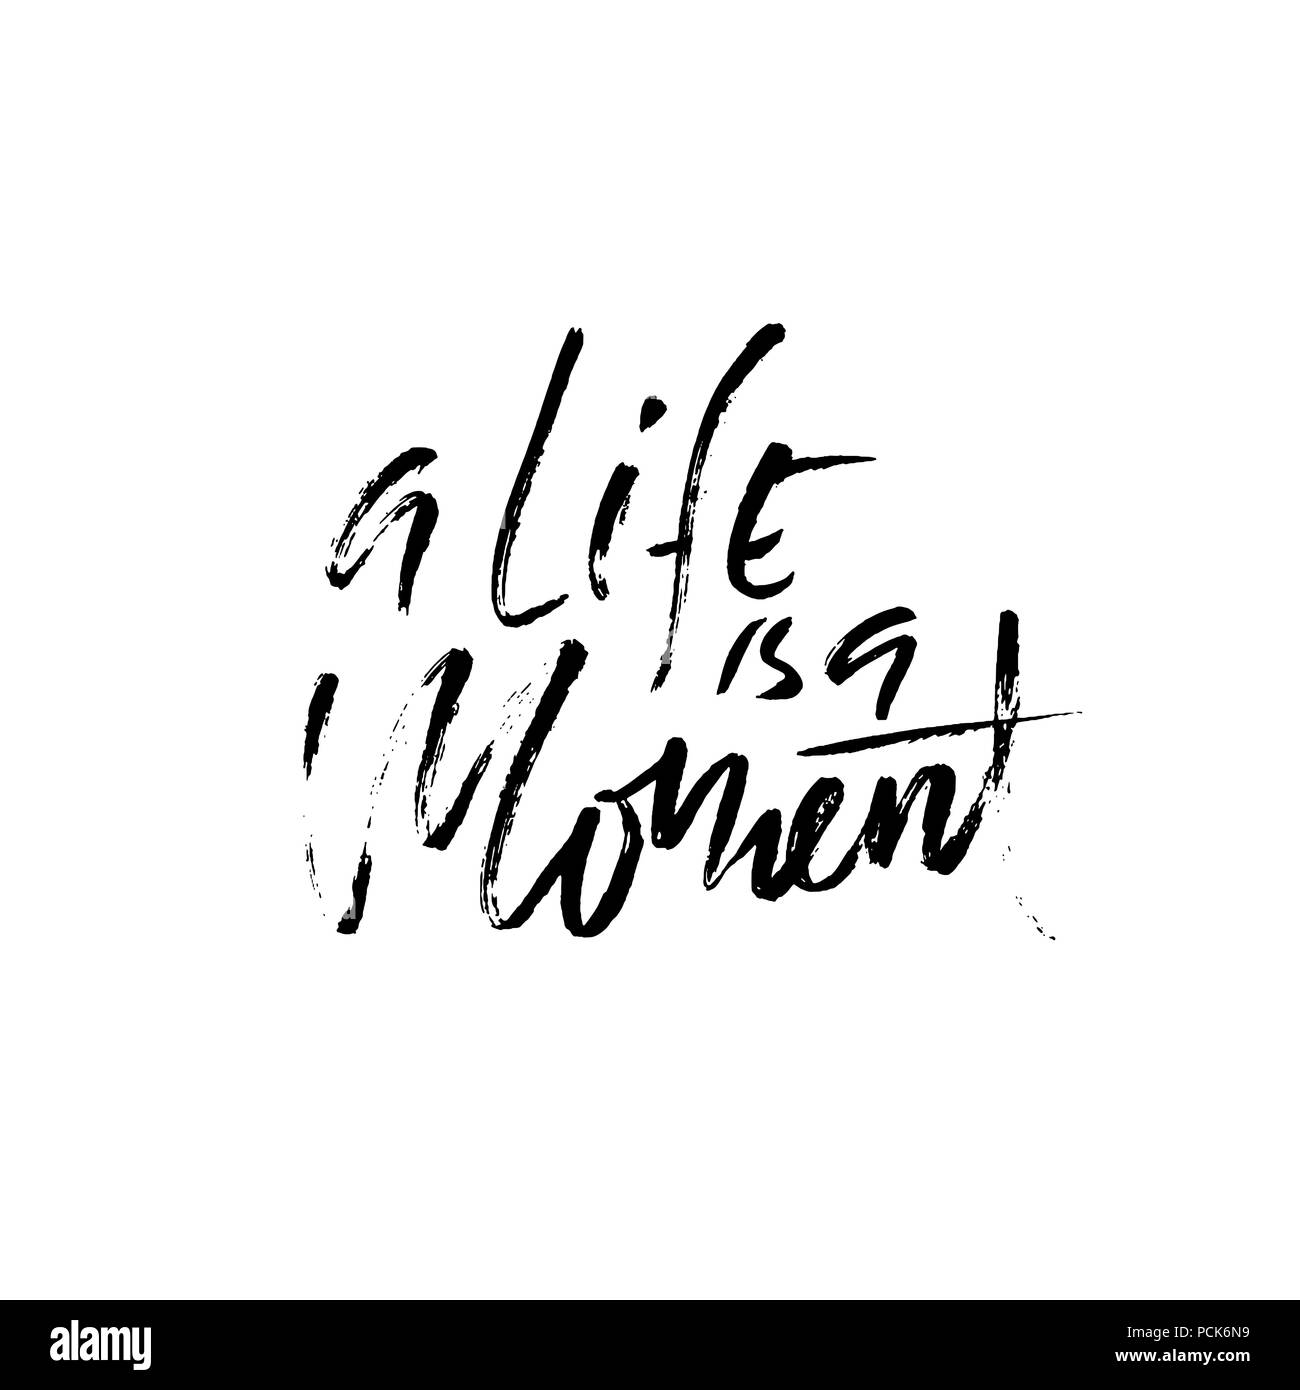 Life is a moment. Hand drawn dry brush lettering. Ink illustration. Modern calligraphy phrase. Vector illustration. Stock Vector